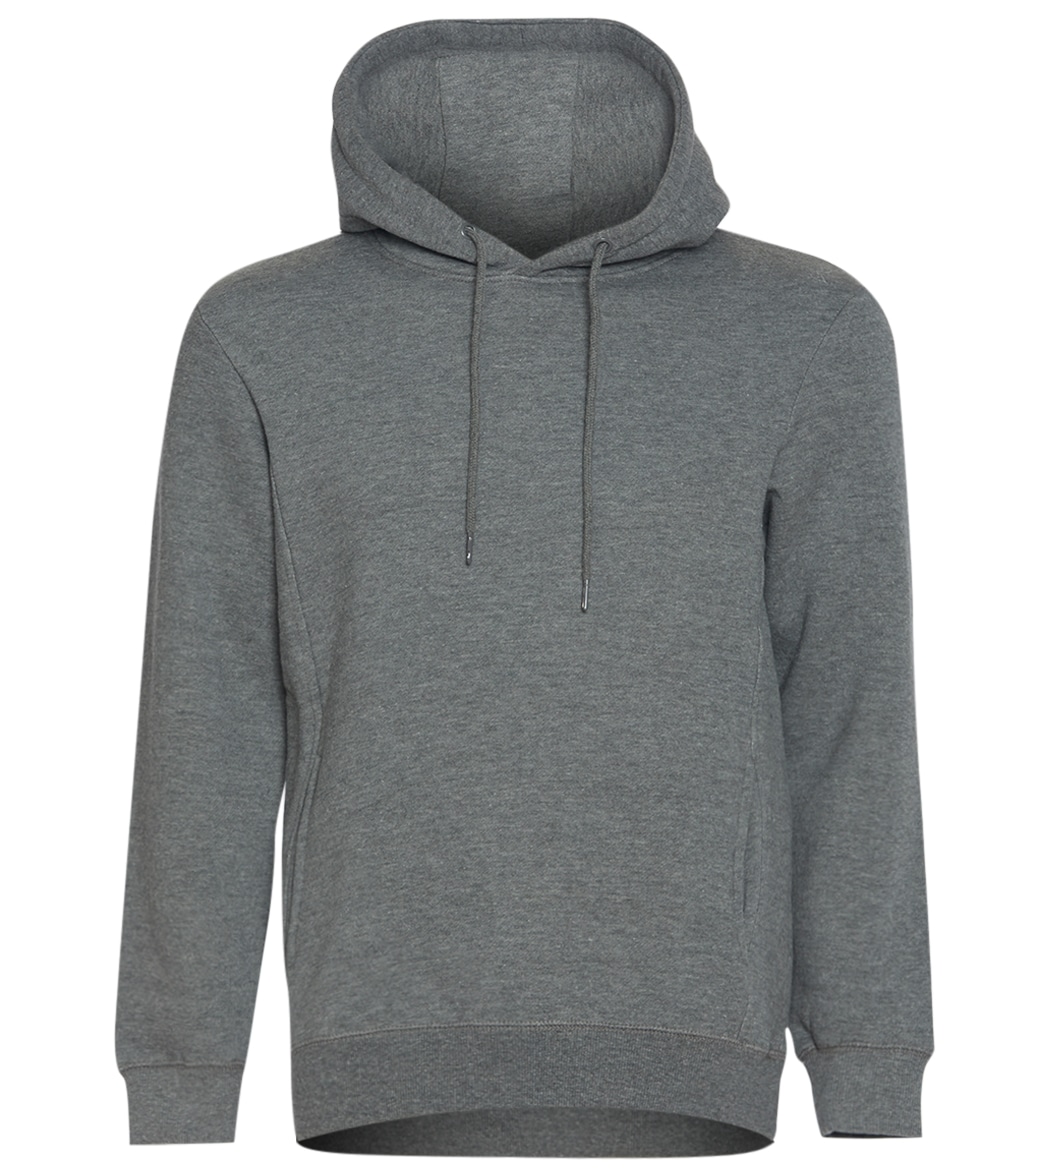 TYR Unisex Hoodie - Heather Grey 3Xl Cotton/Polyester - Swimoutlet.com